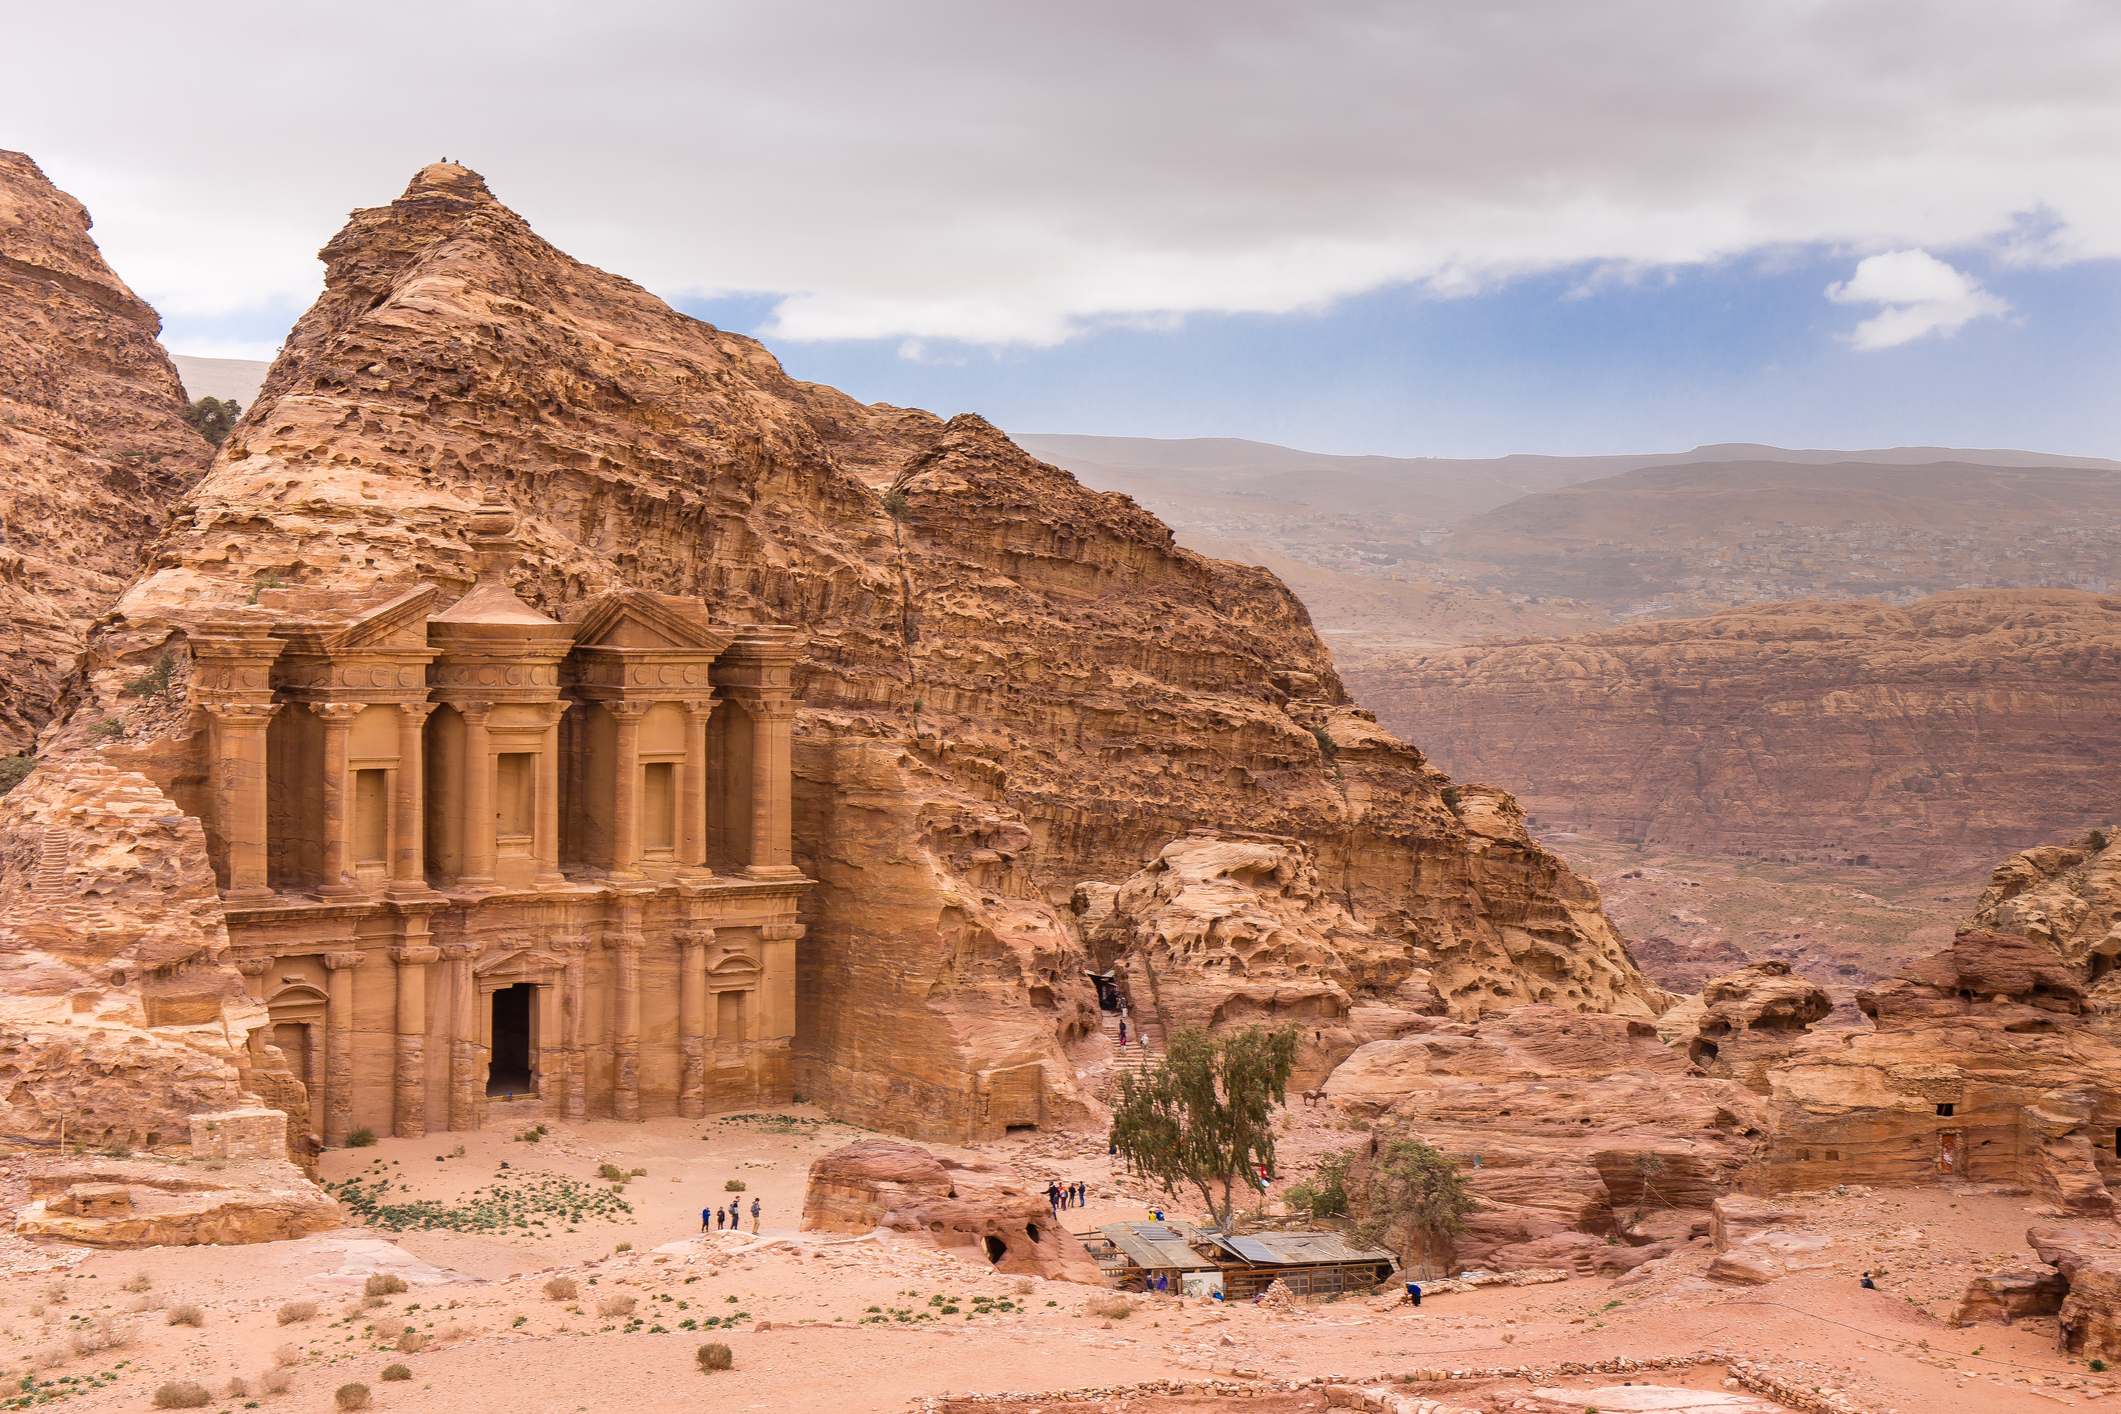 Al Khazneh, also known as The Treasury, at Petra with visitors near its entrance